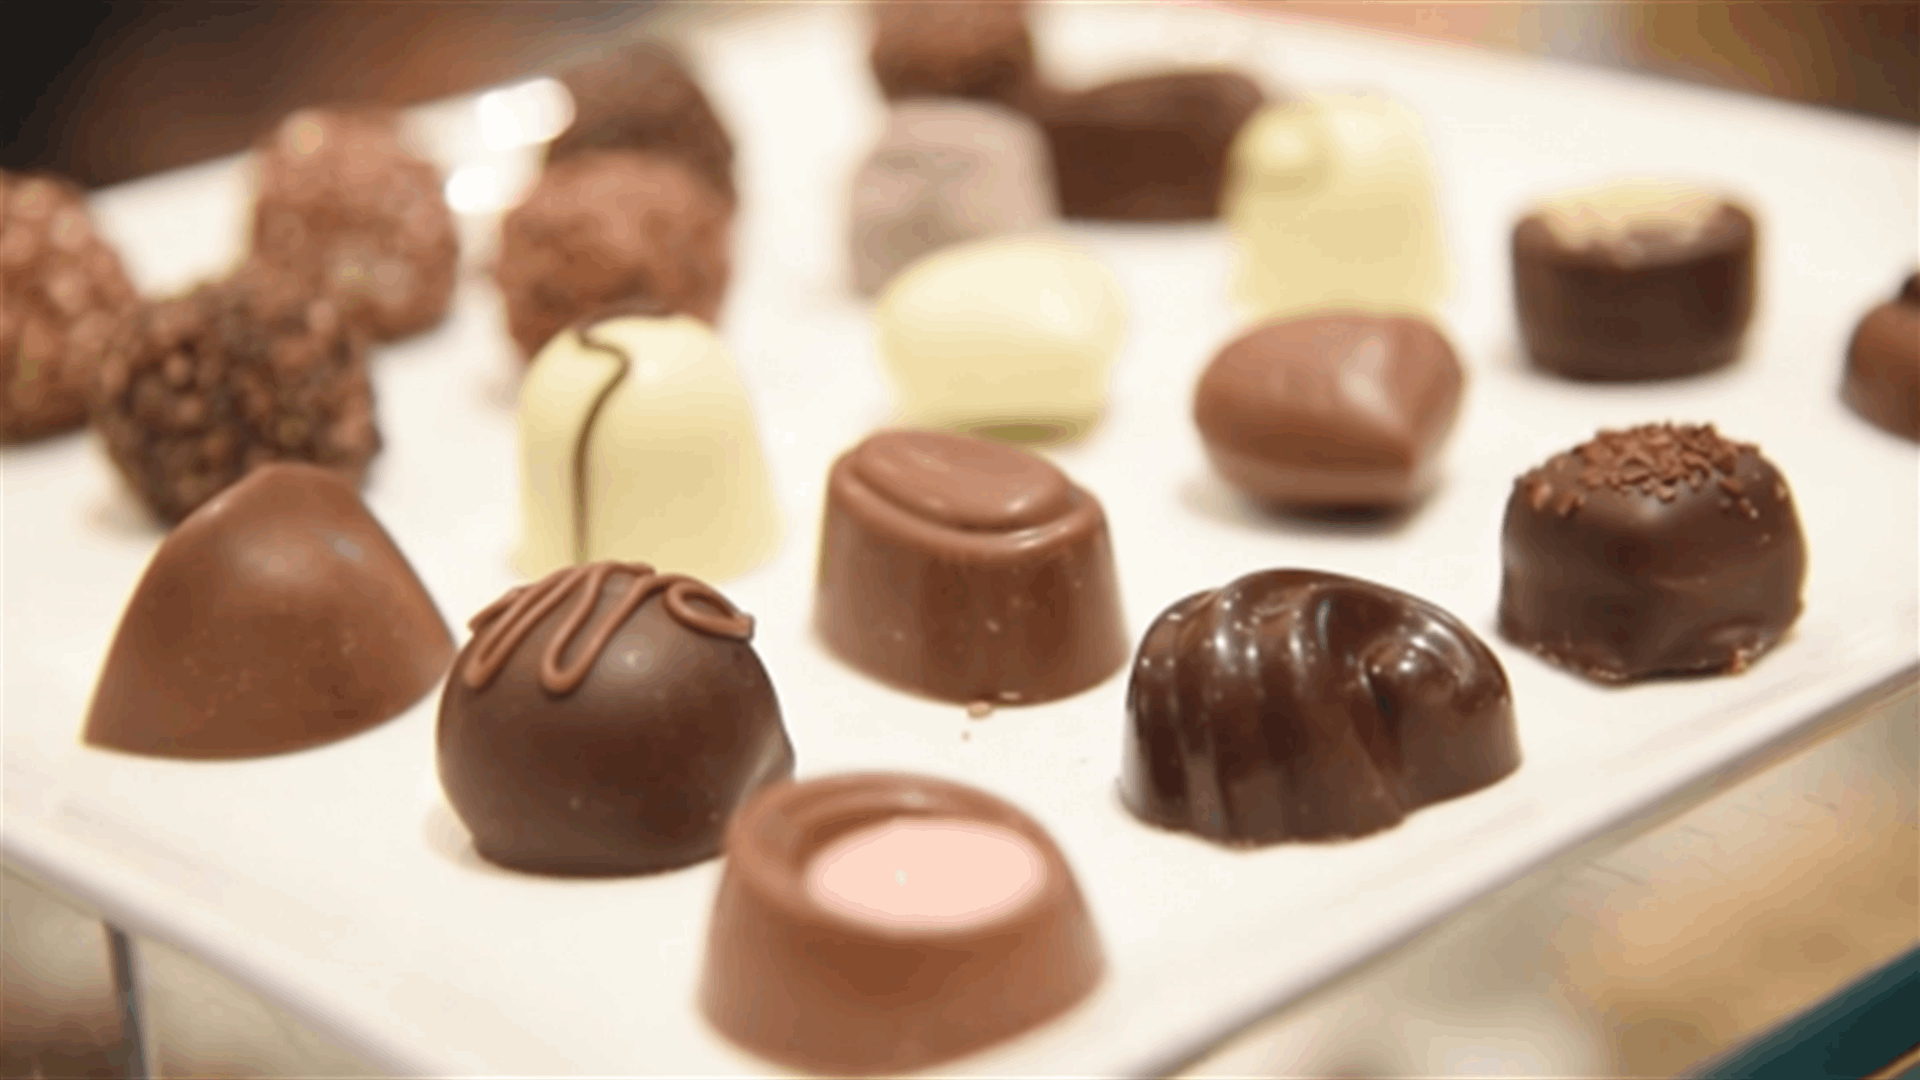 Top Tips To Taste Chocolate Better